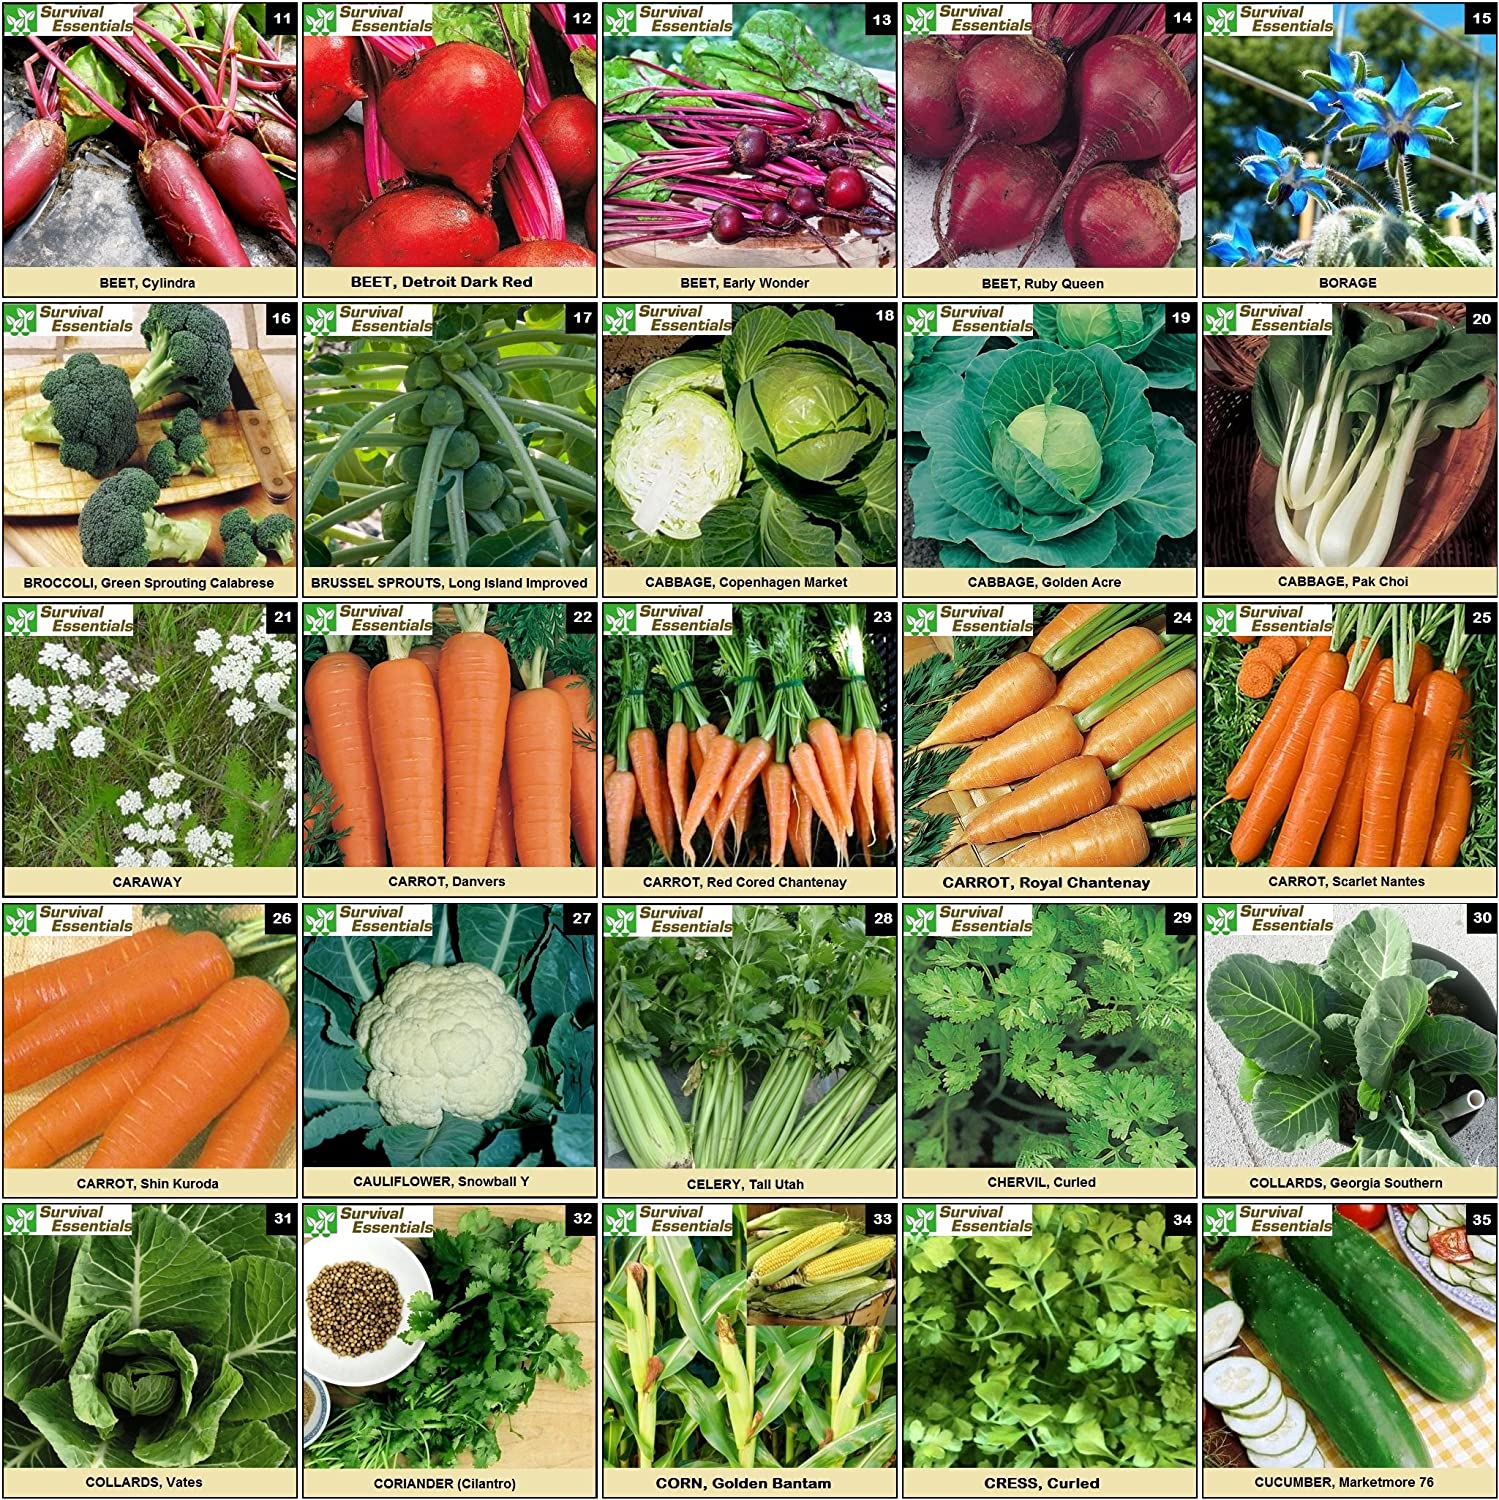 Image displaying a variety of vegetables arranged alphabetically from B to C, showcasing a diverse selection of produce